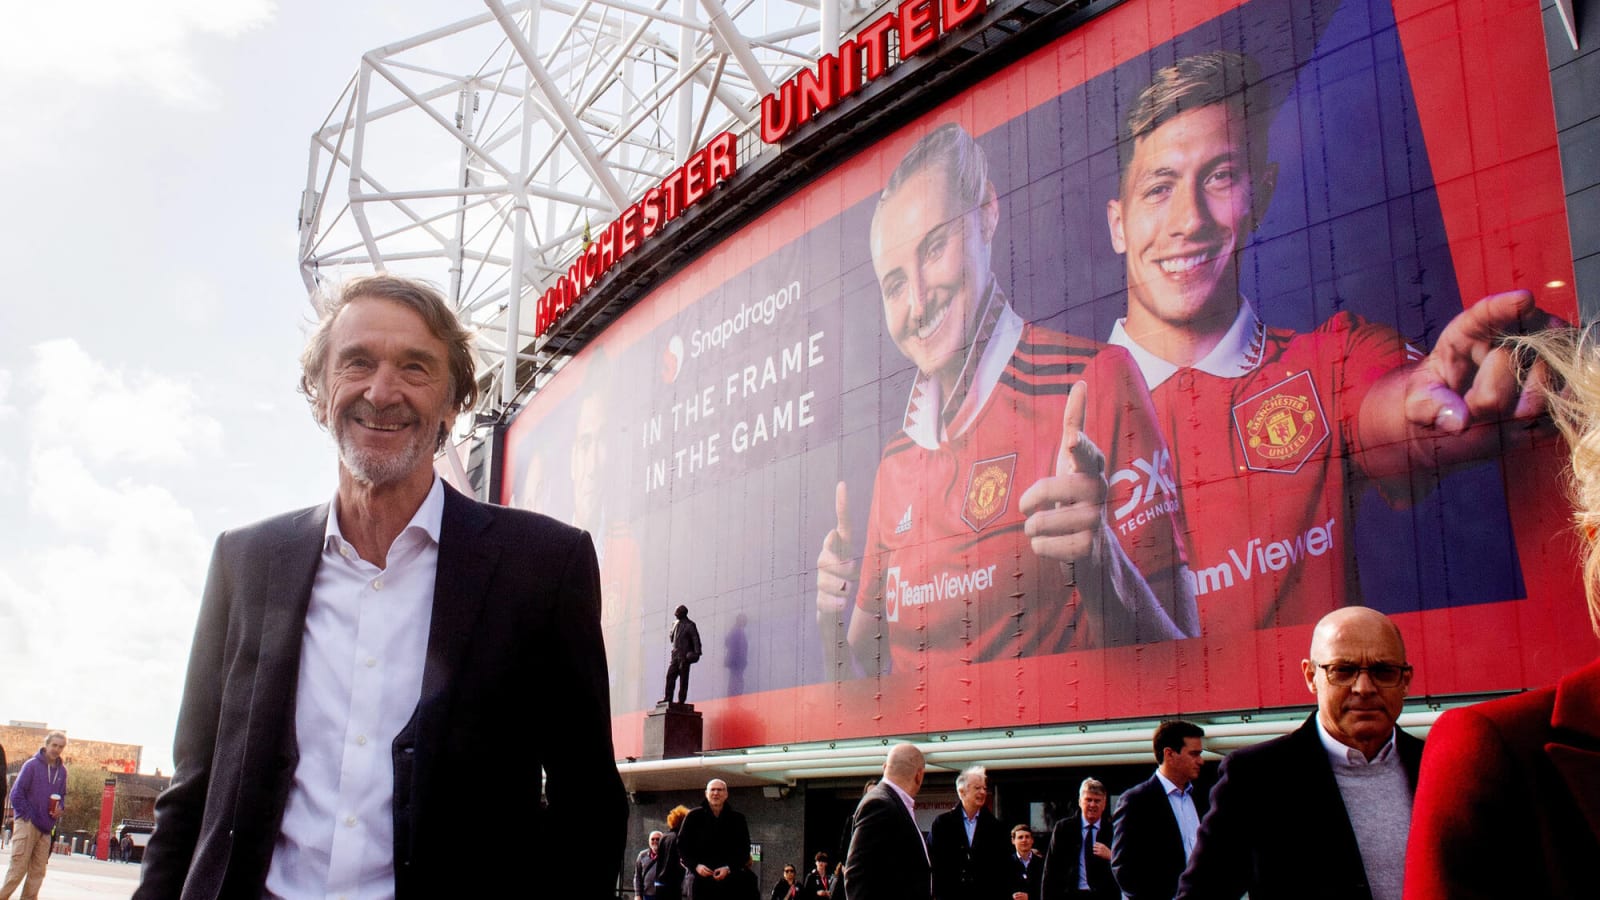 Sir Jim Ratcliffe sets £100m objective for Manchester United academy product sales